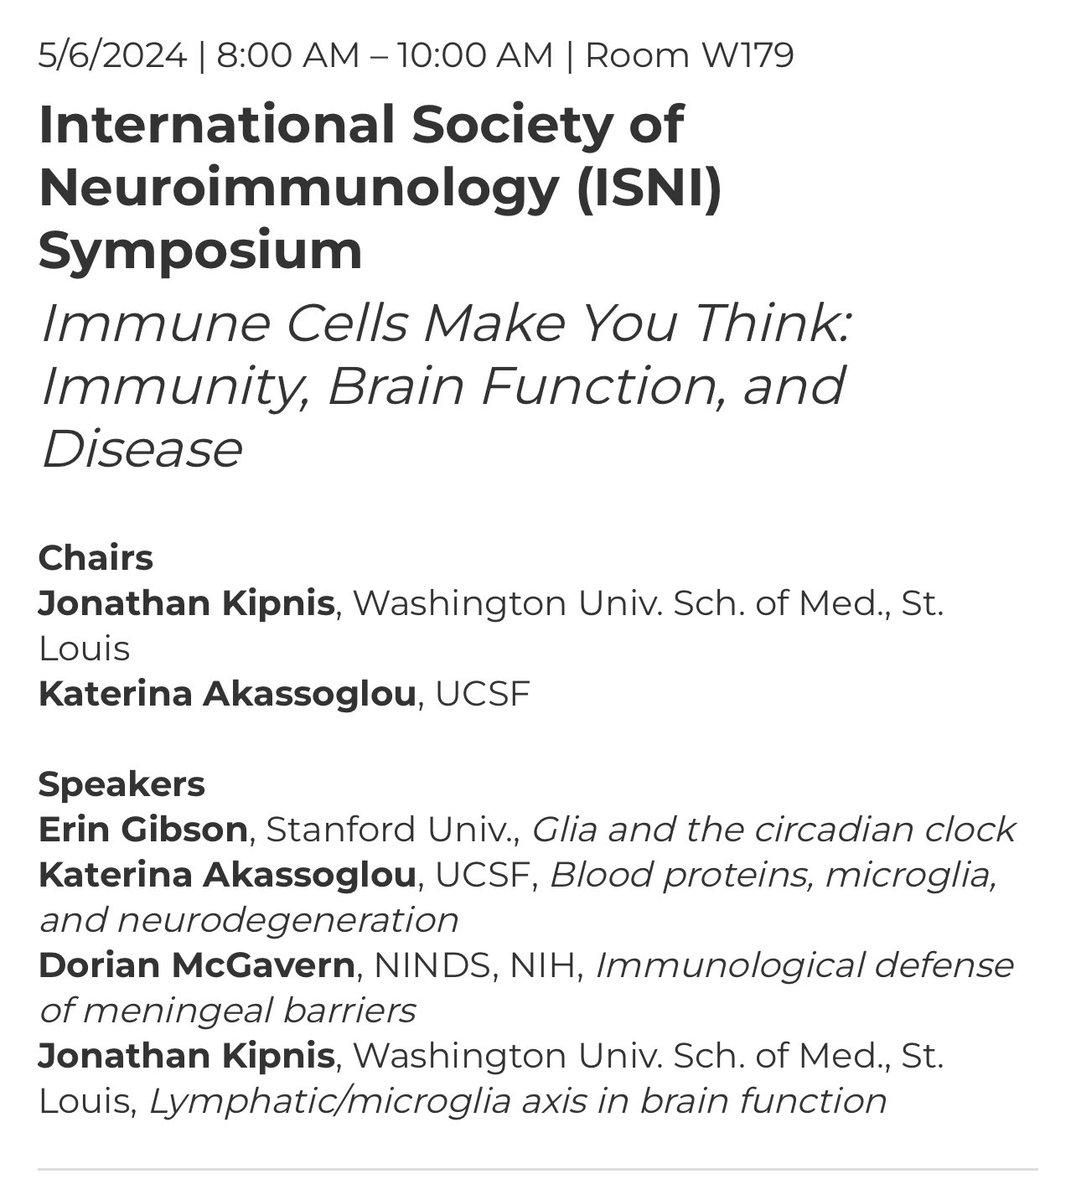 Excited to speak tomorrow at @ImmunologyAAI International Society for #Neuroimmunology @ISNI_neuro Symposium “Immune cells make you think: Immunity, Brain Function & Disease” w/ @jonykipnis  @ErinMGibson & Dorian McGavern. Join us if you are at #AAI24 in Chicago! 🧠🩸💉🧬